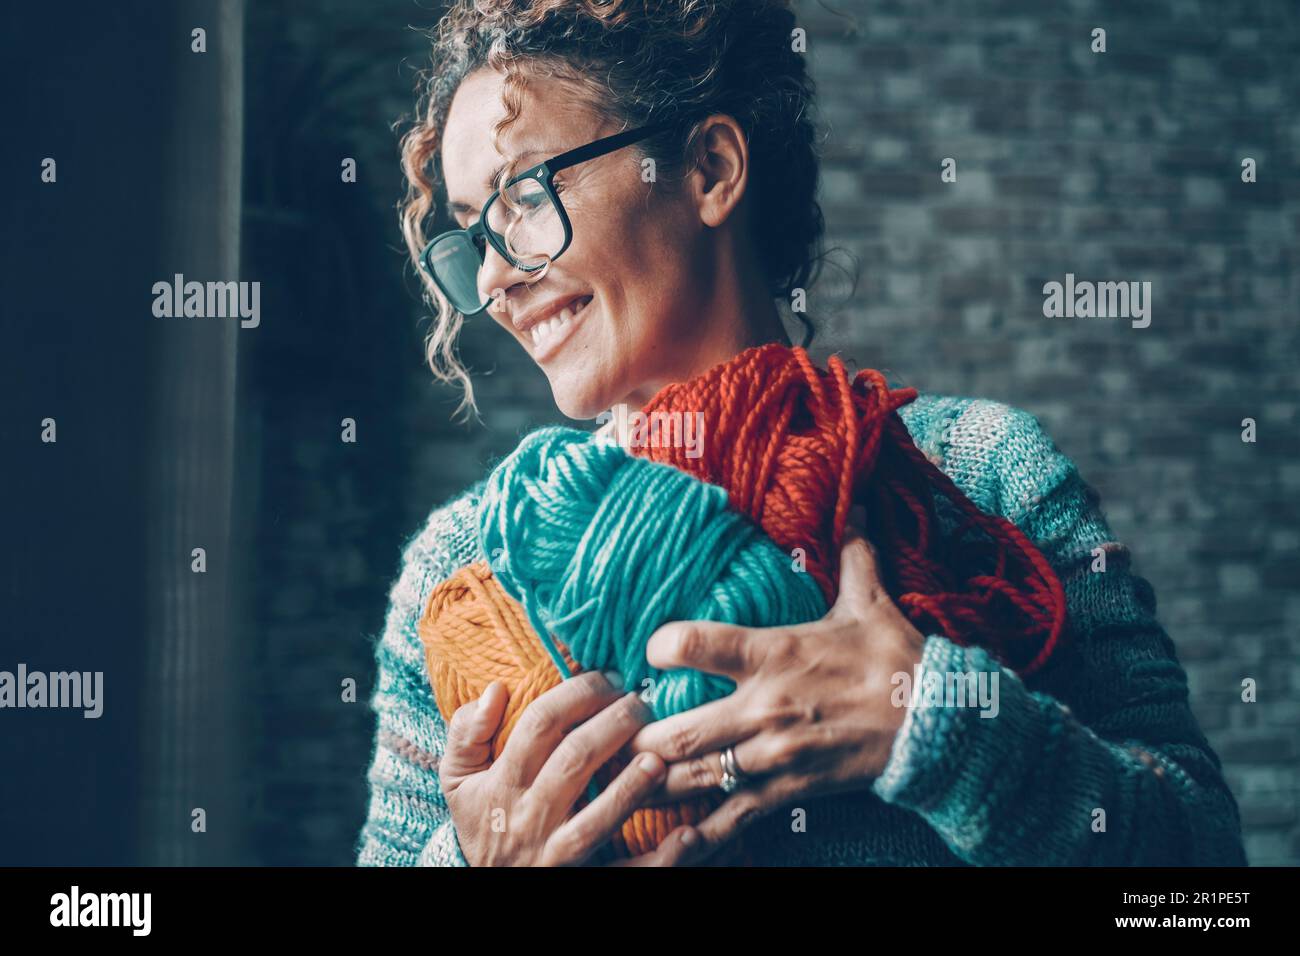 Woman, Blonde, Curls, Glasses, Smile, Look sideways, Hands, Wool, Colorful, Different, Hold, portrait Stock Photo